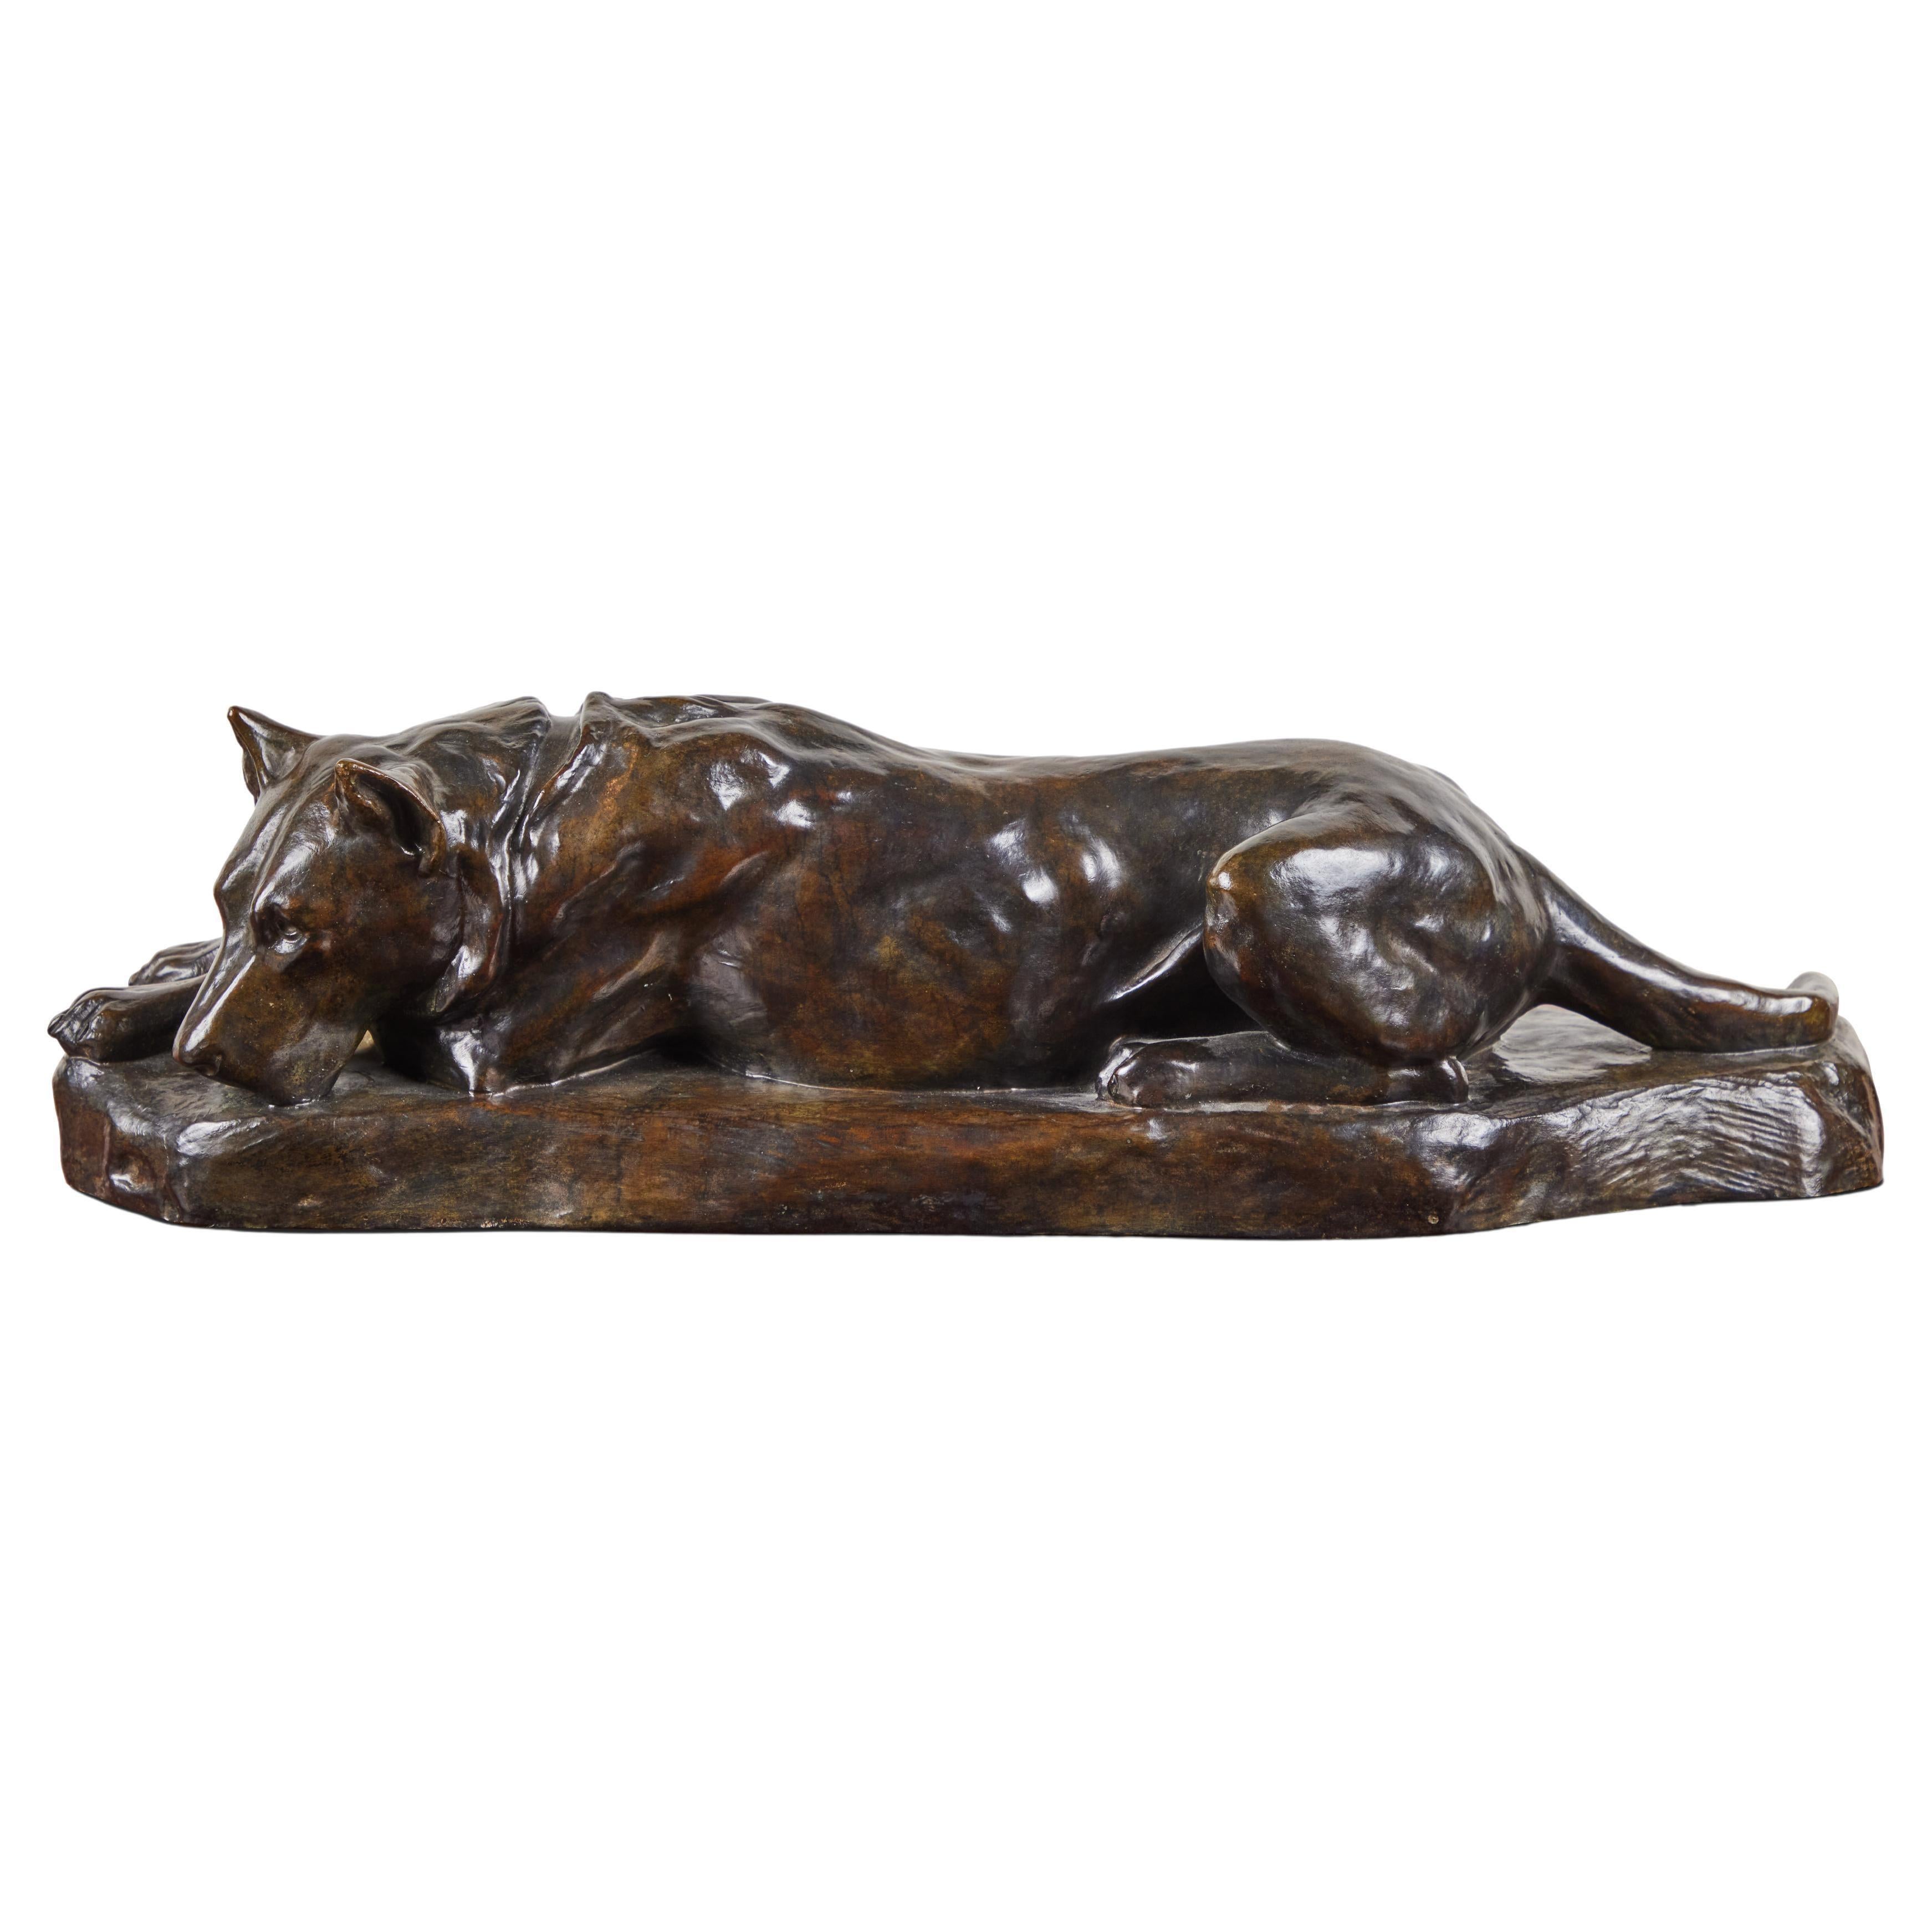 Sensitively rendered, hand-cast, signed bronze sculpture of a resting dog on a naturalistic base of the same by listed French artist, Georges Lucien-Guyot (1885-1973). The animal is relaxed with head on crossed paws- a familiar and charming